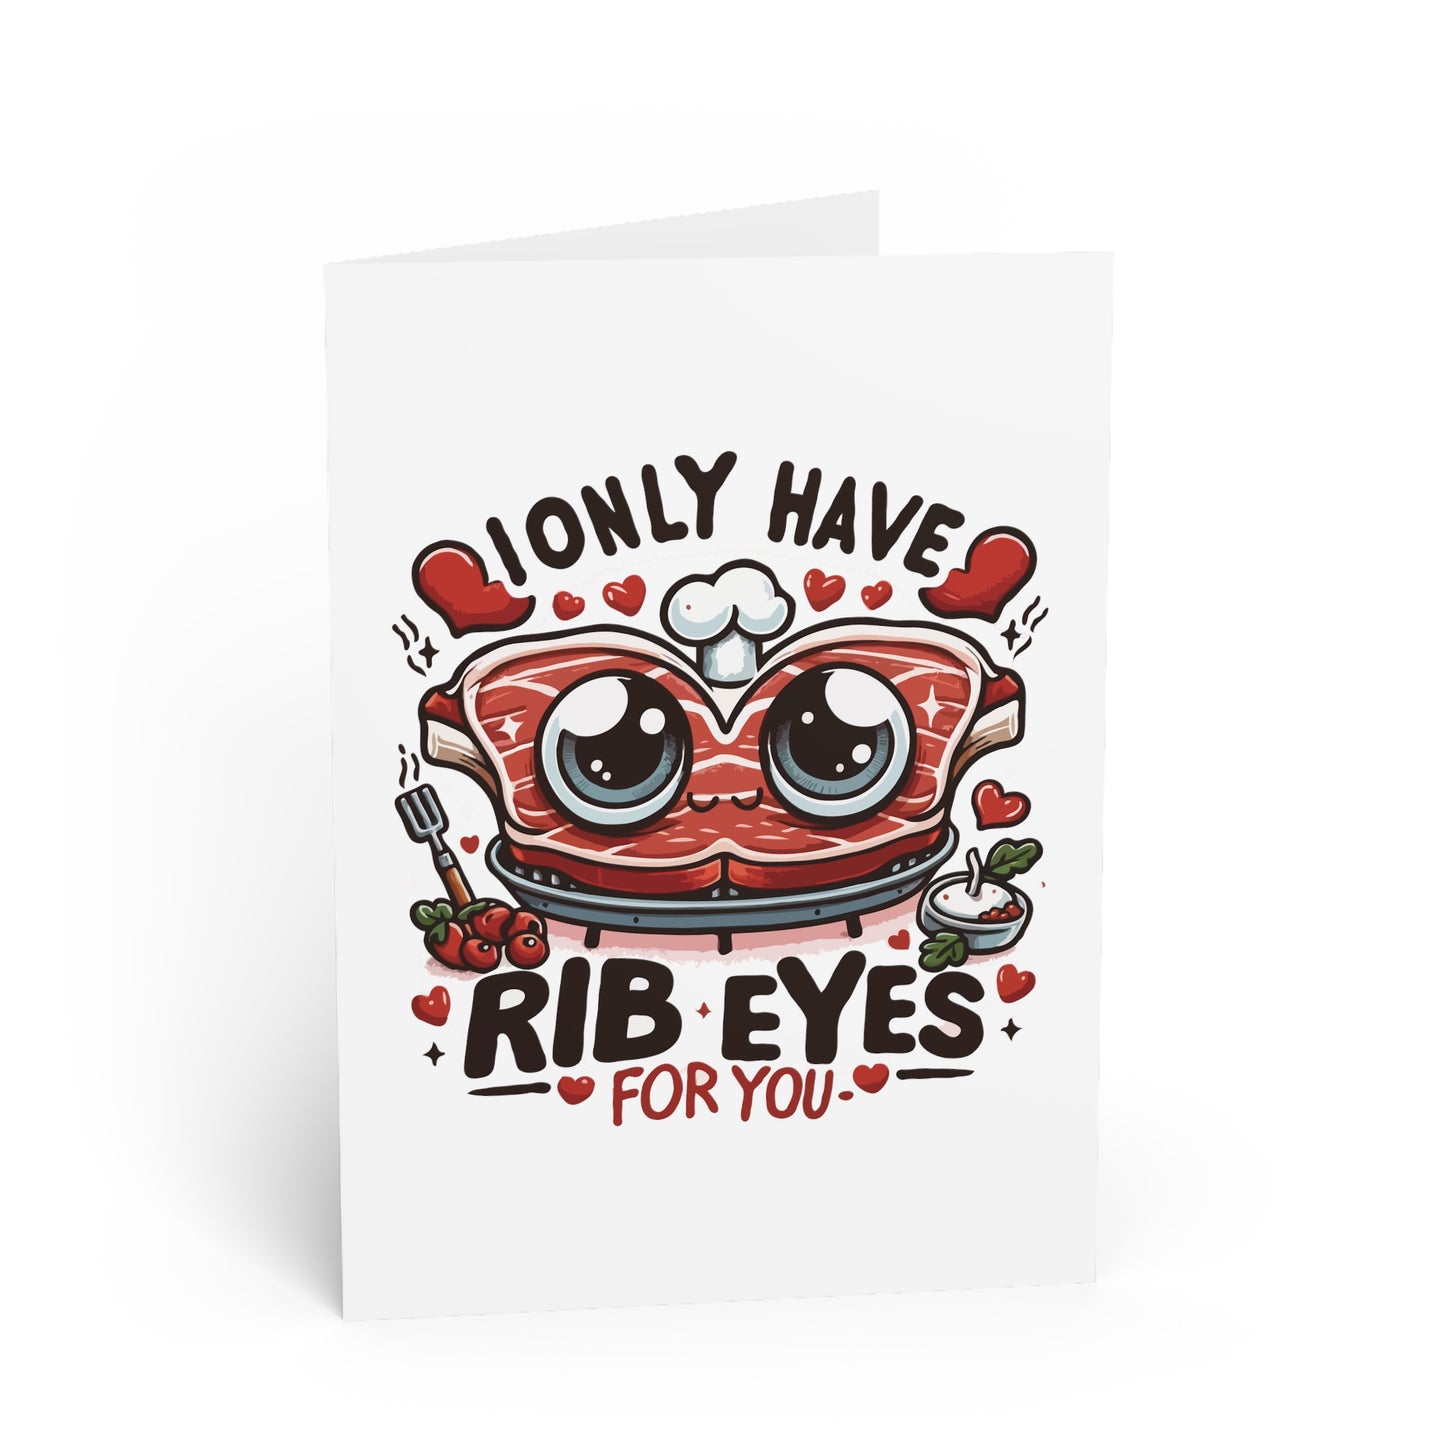 Rib Eyes for You! Valentine's Day Card